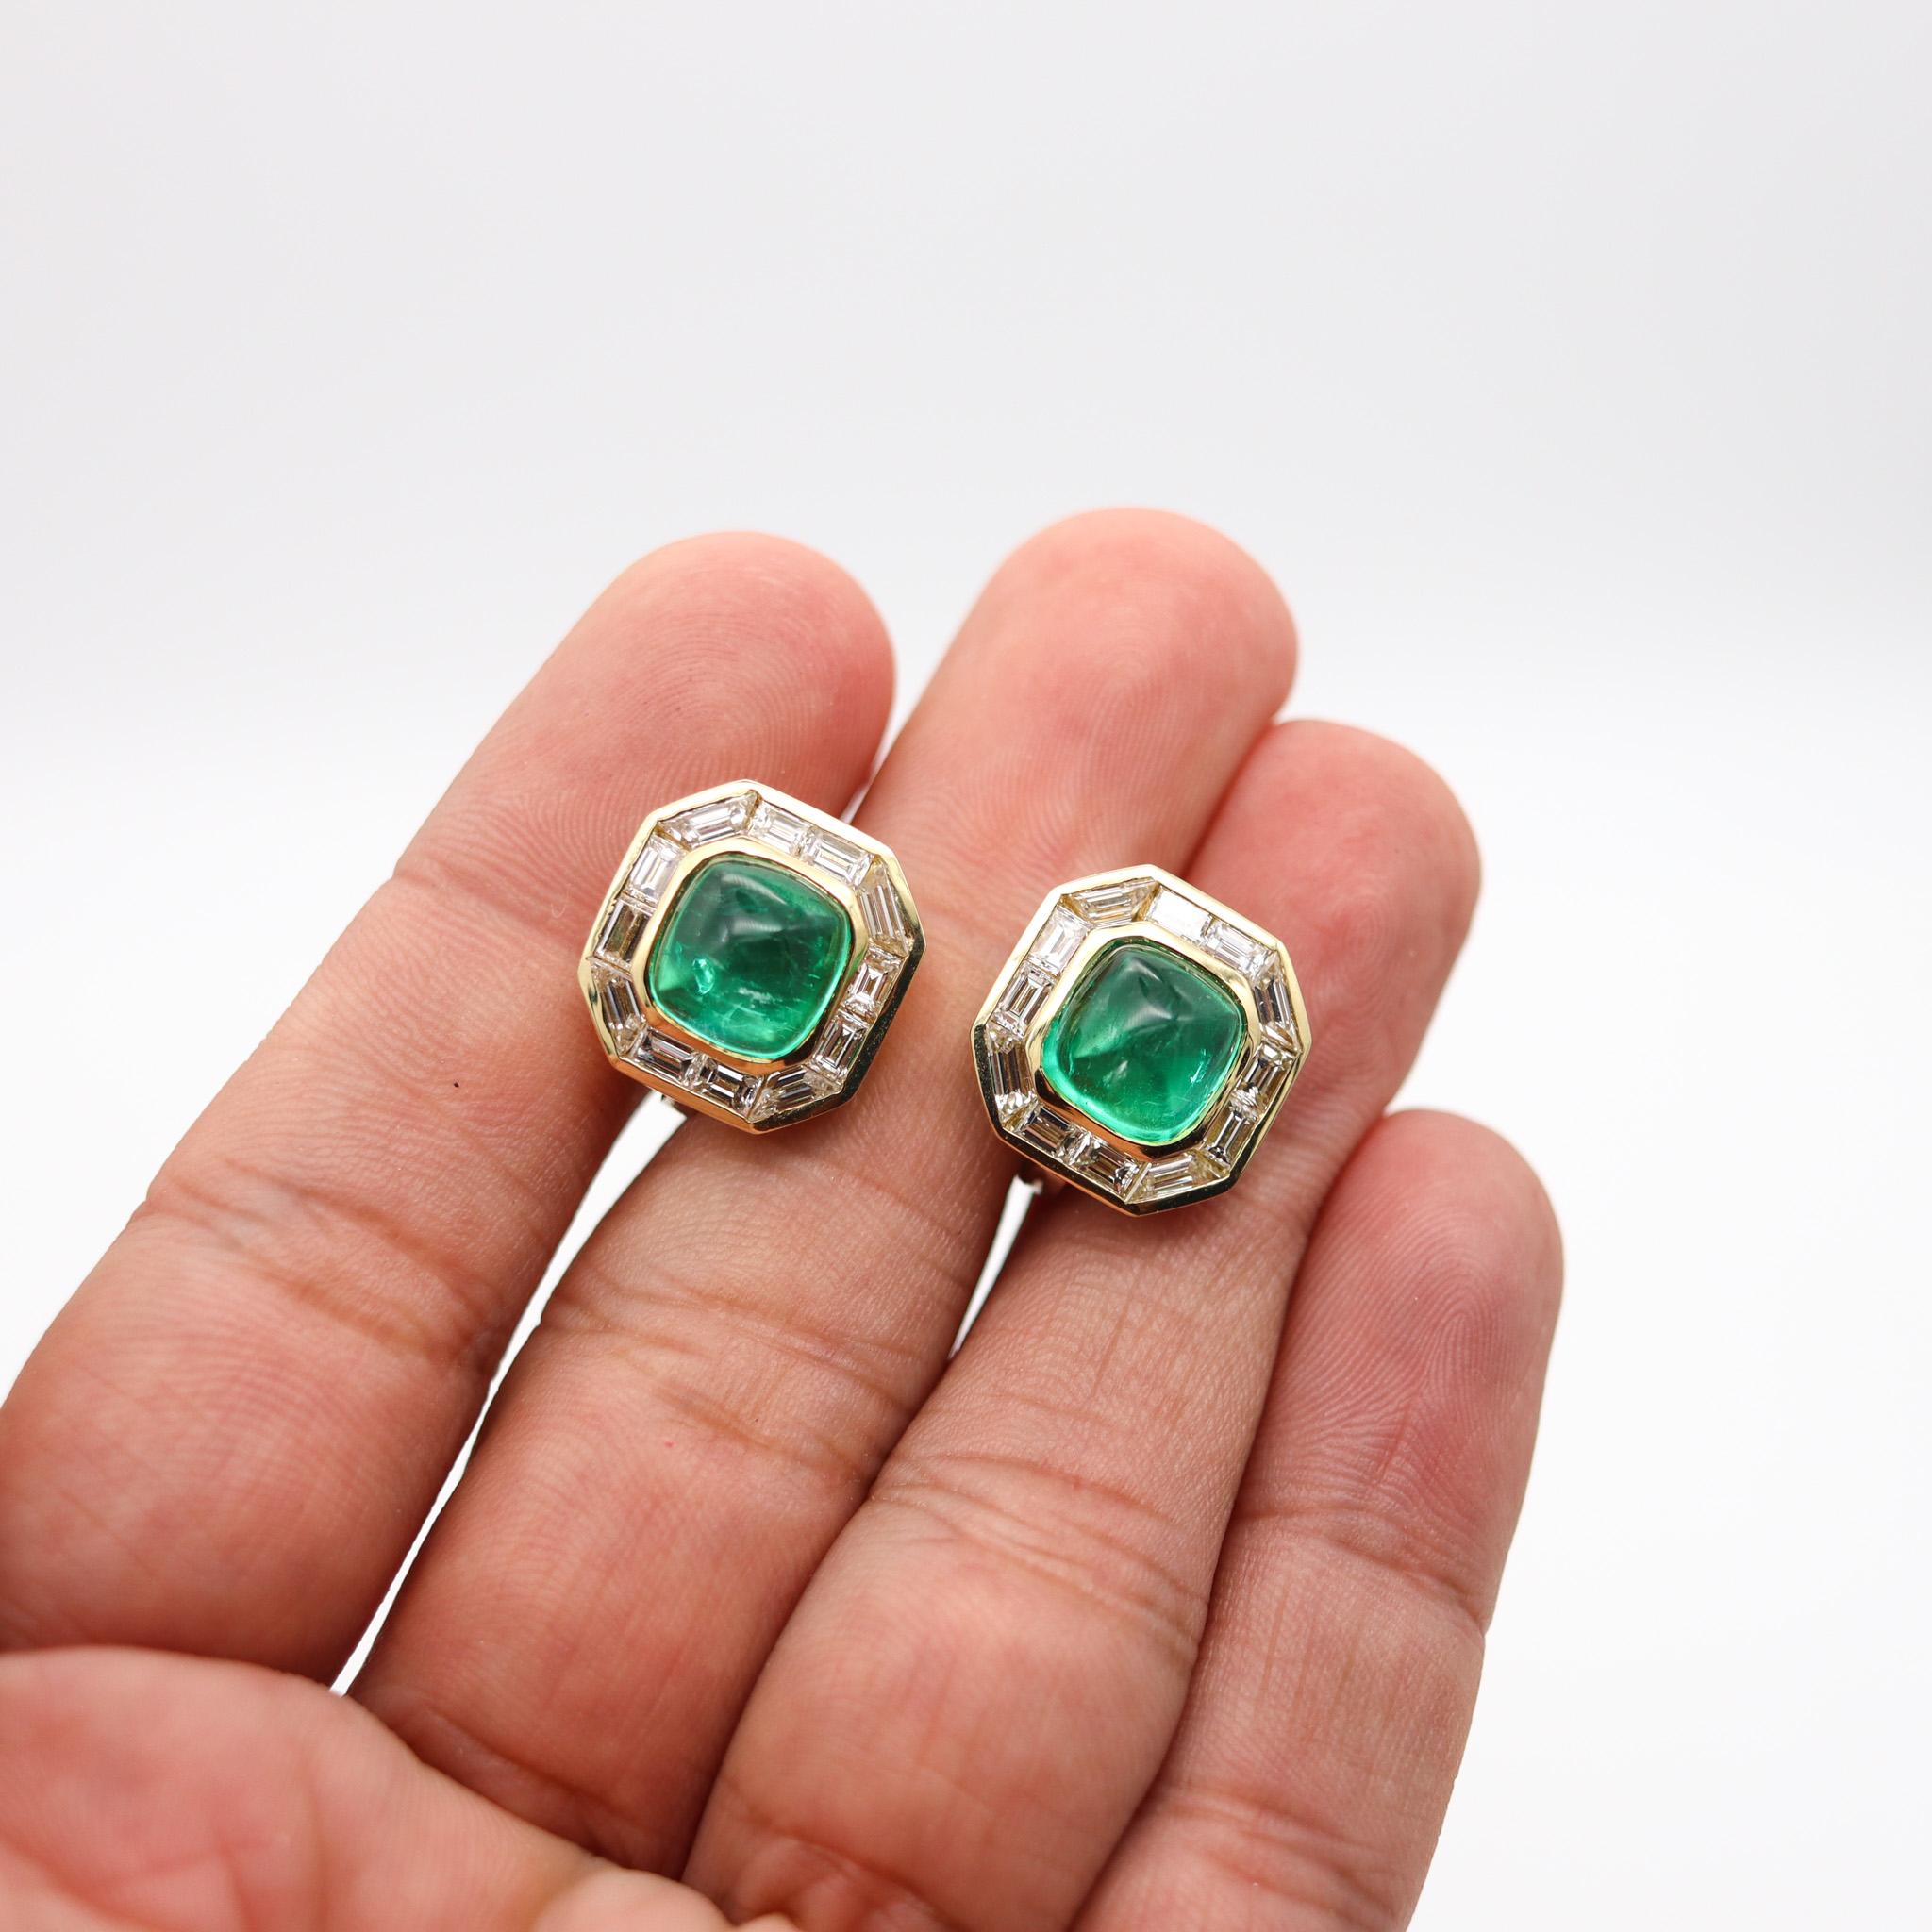 Bvlgari Clip On Earrings In 18Kt Gold With 11.72 Ctw In Diamonds And Emeralds In Excellent Condition For Sale In Miami, FL